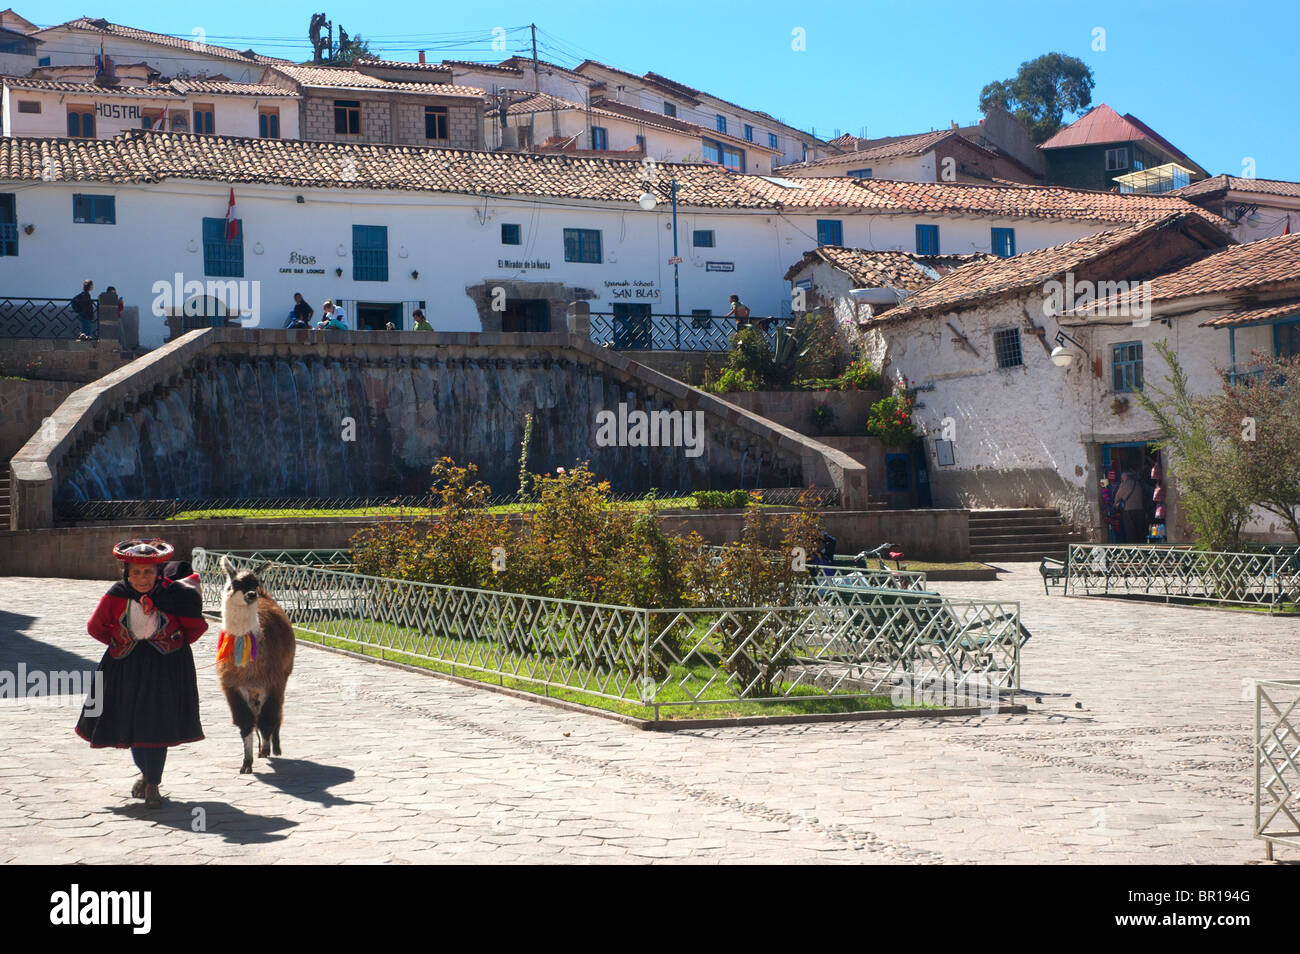 Typical stone and adobe housing surrounding San Blas Plaza in the city of Cusco, Peru Stock Photo